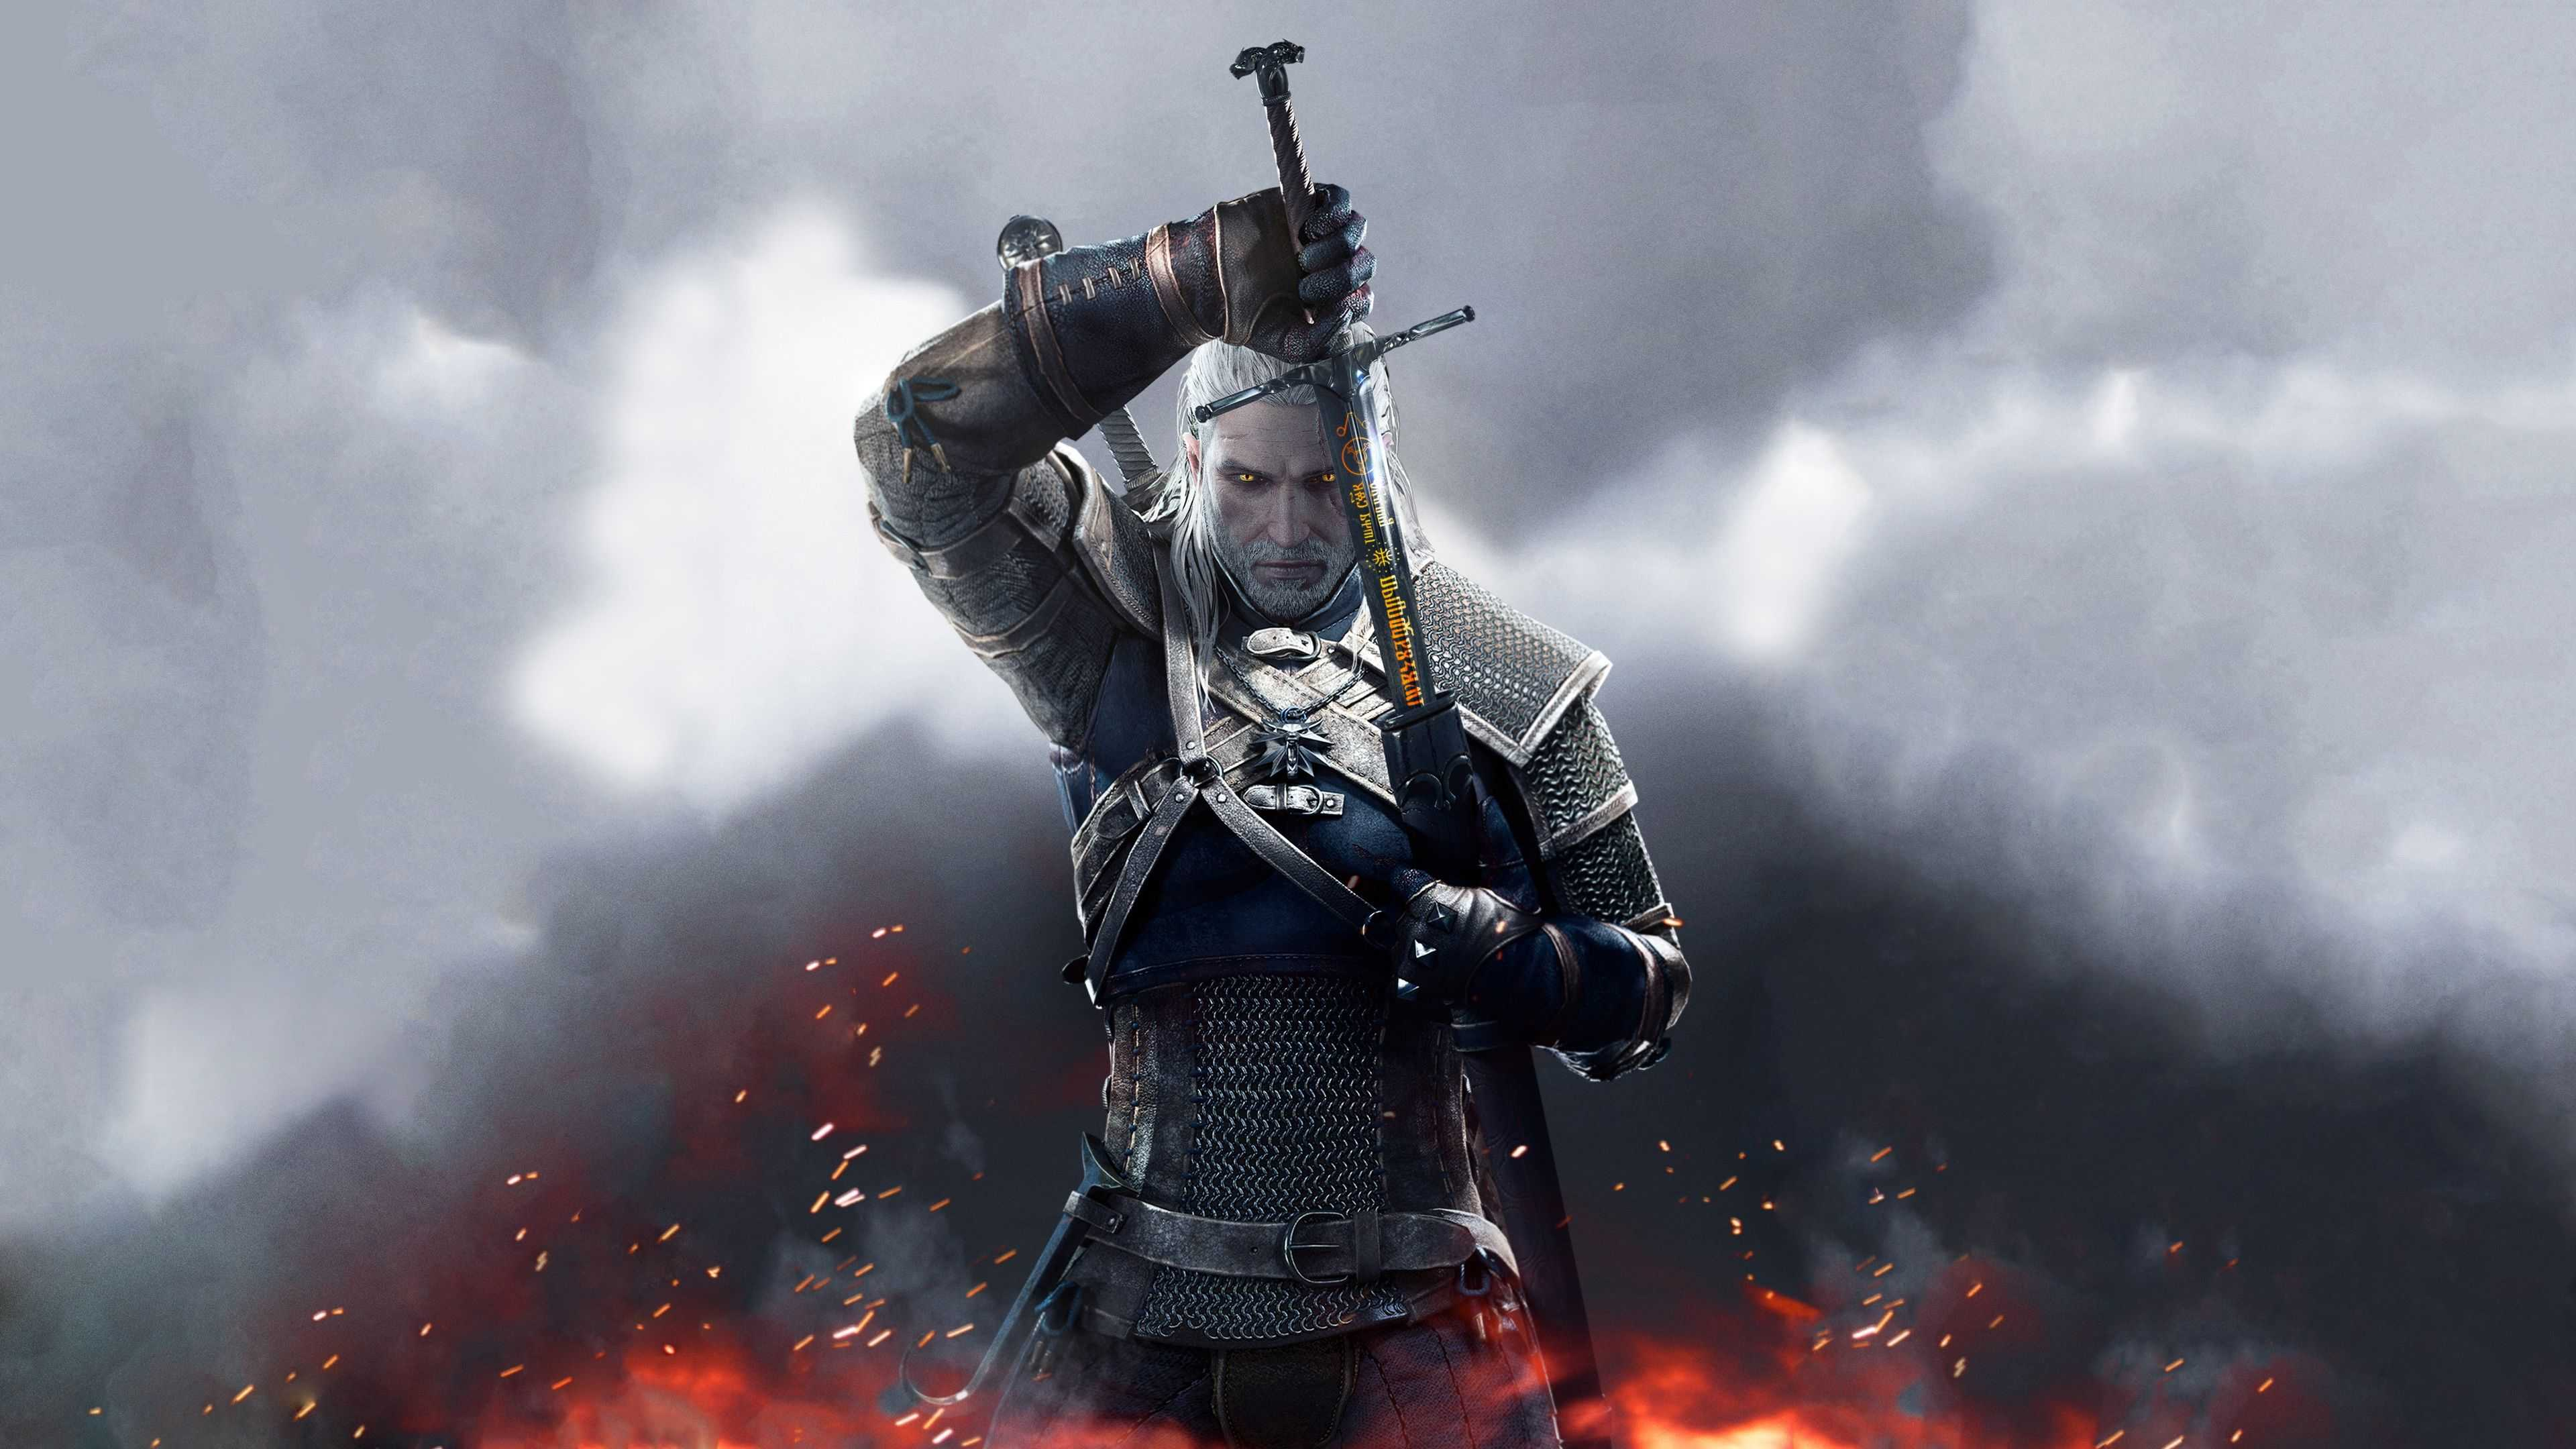 3840x2160 The Witcher Wallpaper